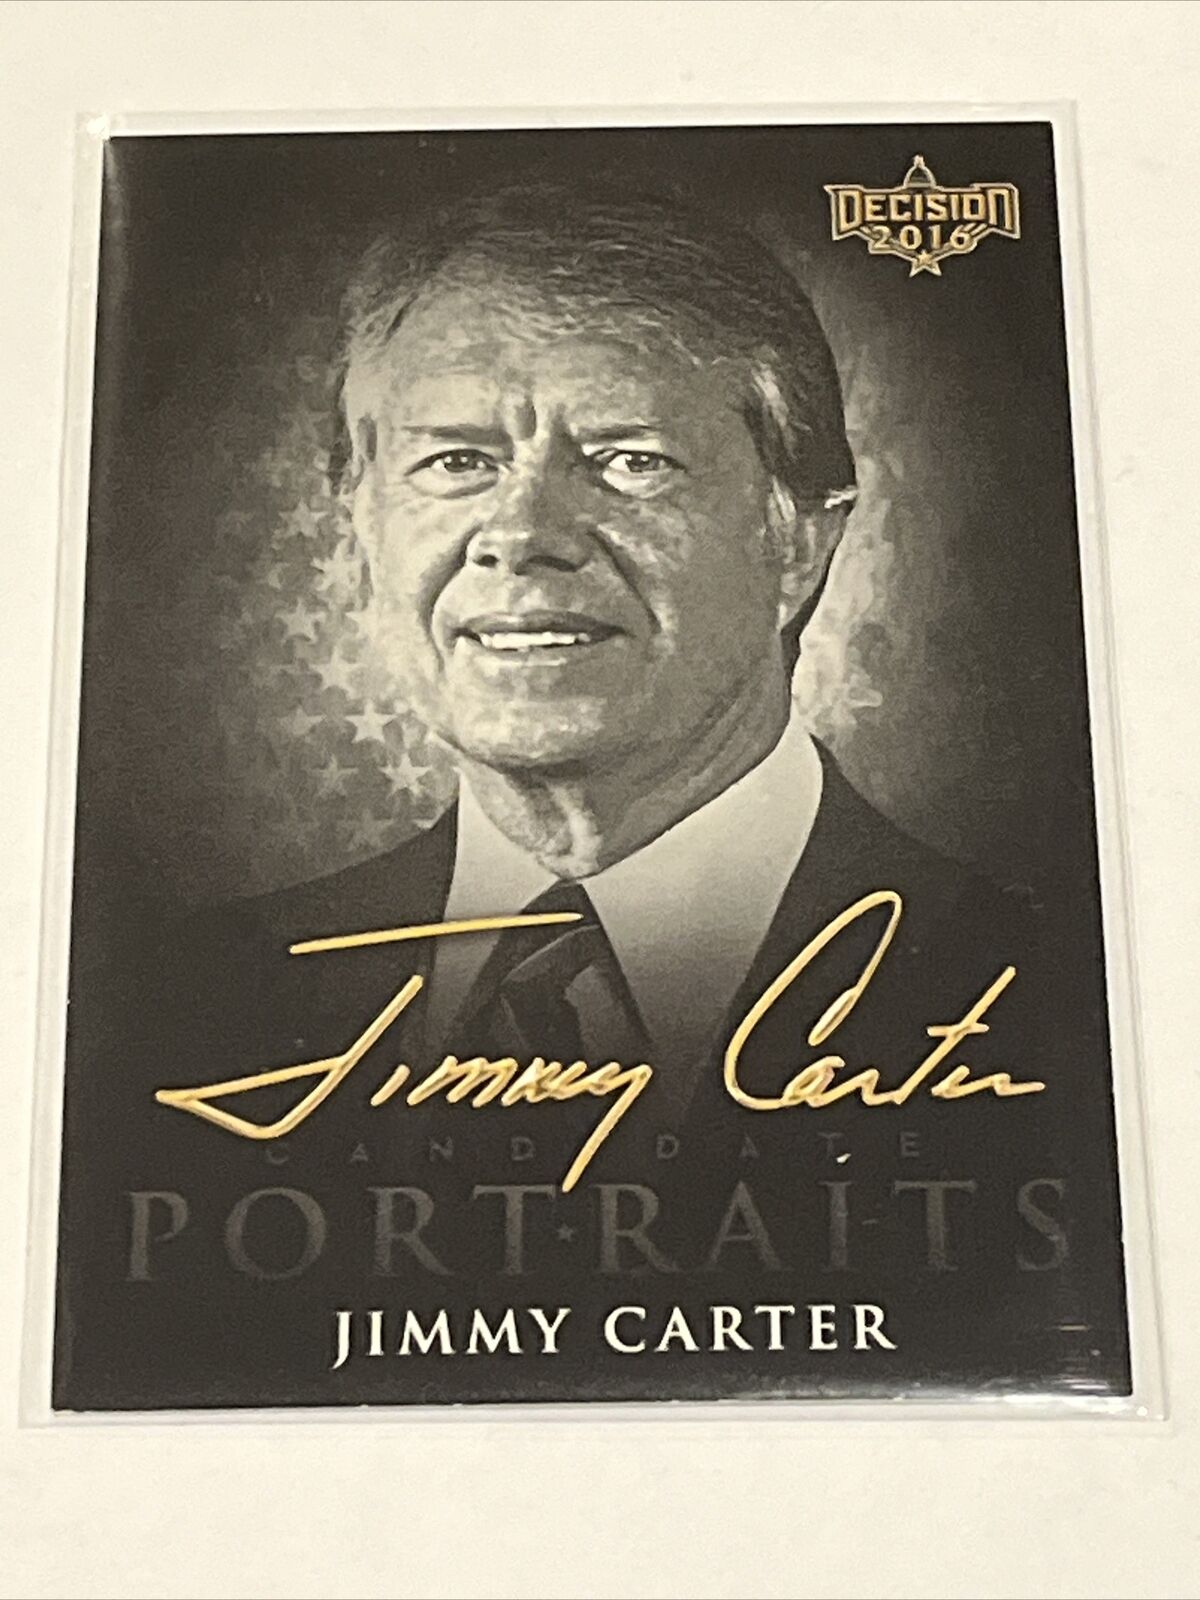 2016 Decision 2016 Candidate Portraits Hobby Jimmy Carter #CP44 9cf